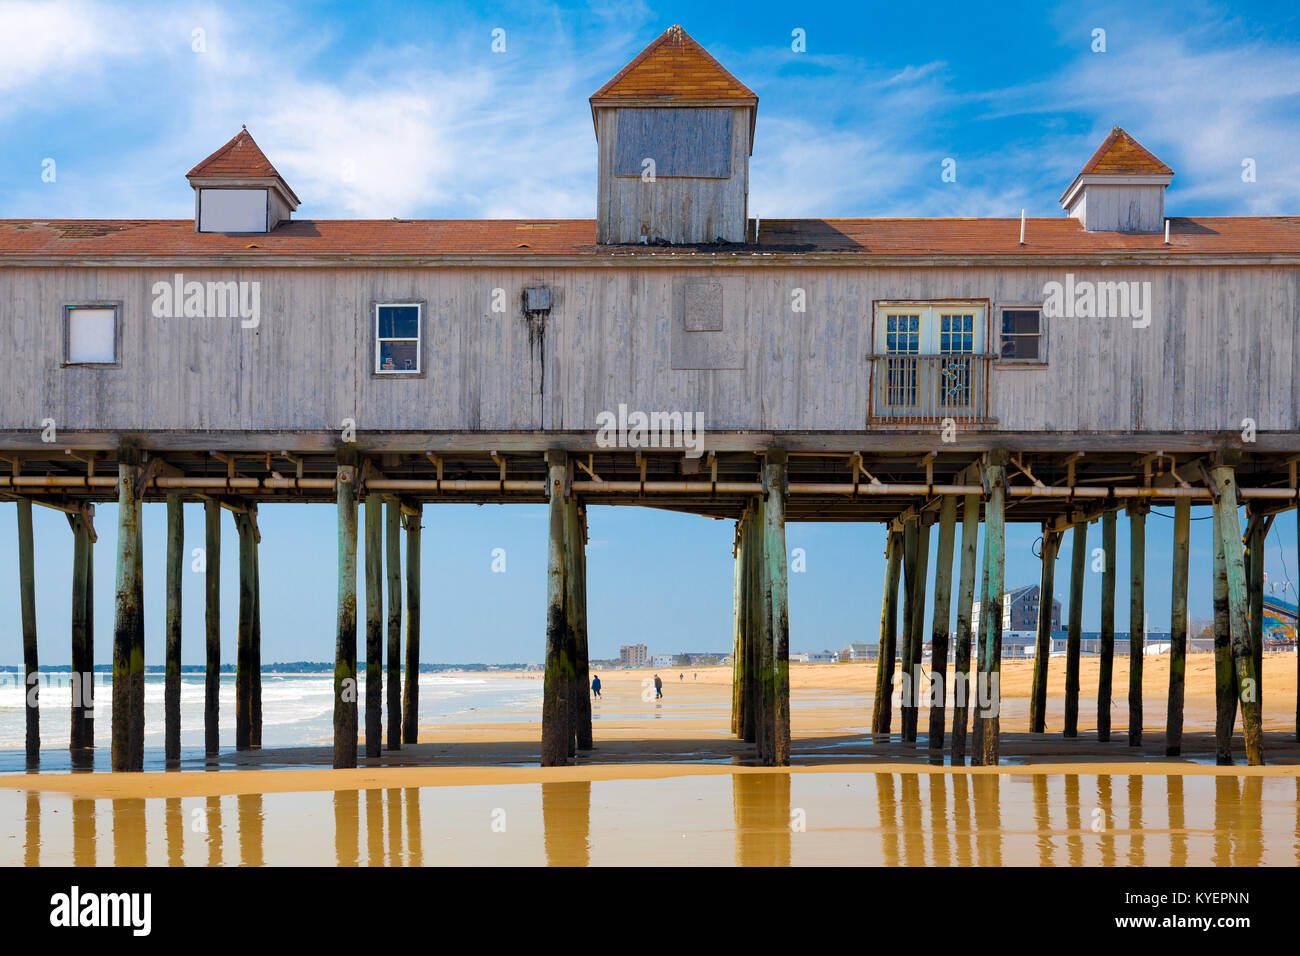 Maine Orchard Beach historic wooden pier in New England USA Stock Photo